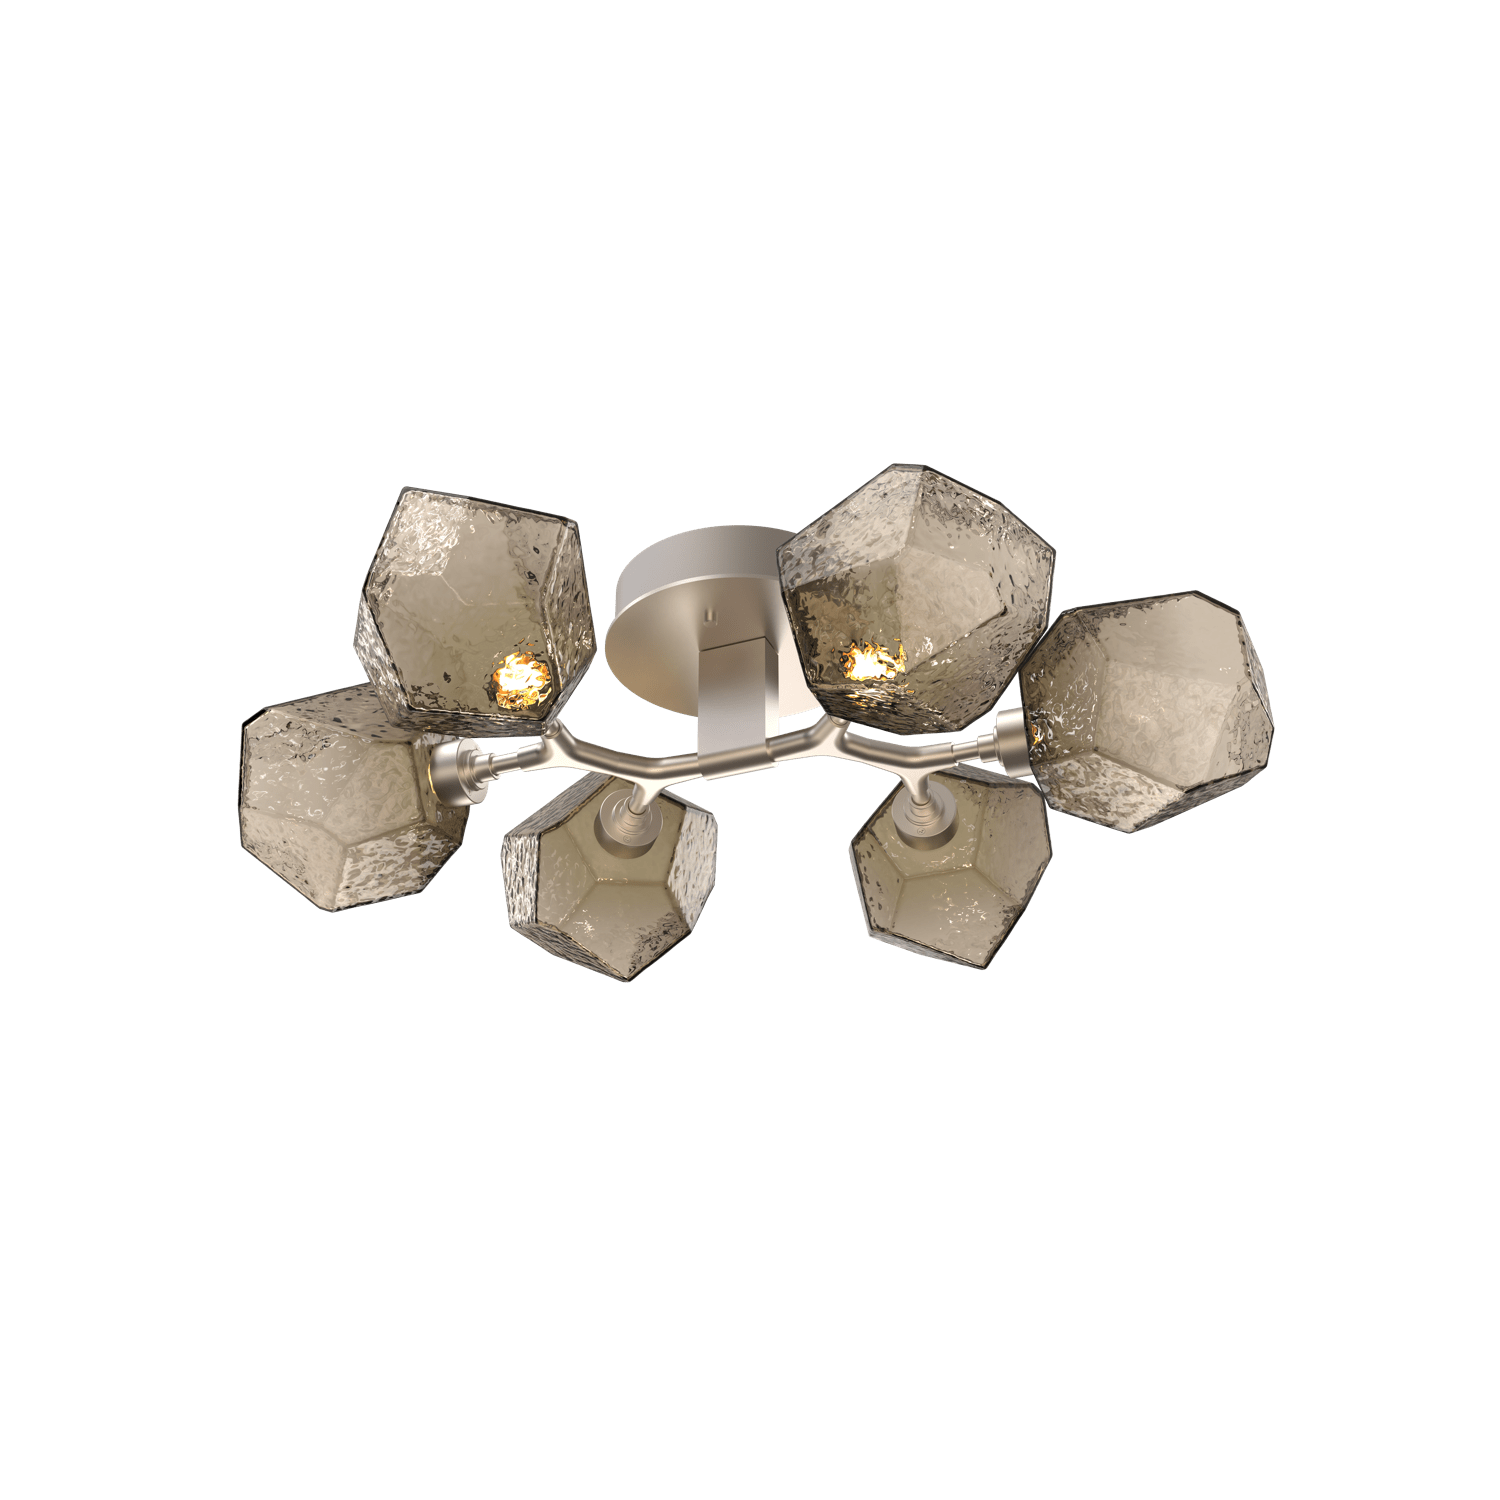 CLB0039-01-BS-B-Hammerton-Studio-Gem-6-light-organic-flush-mount-light-with-metallic-beige-silver-finish-and-bronze-blown-glass-shades-and-LED-lamping